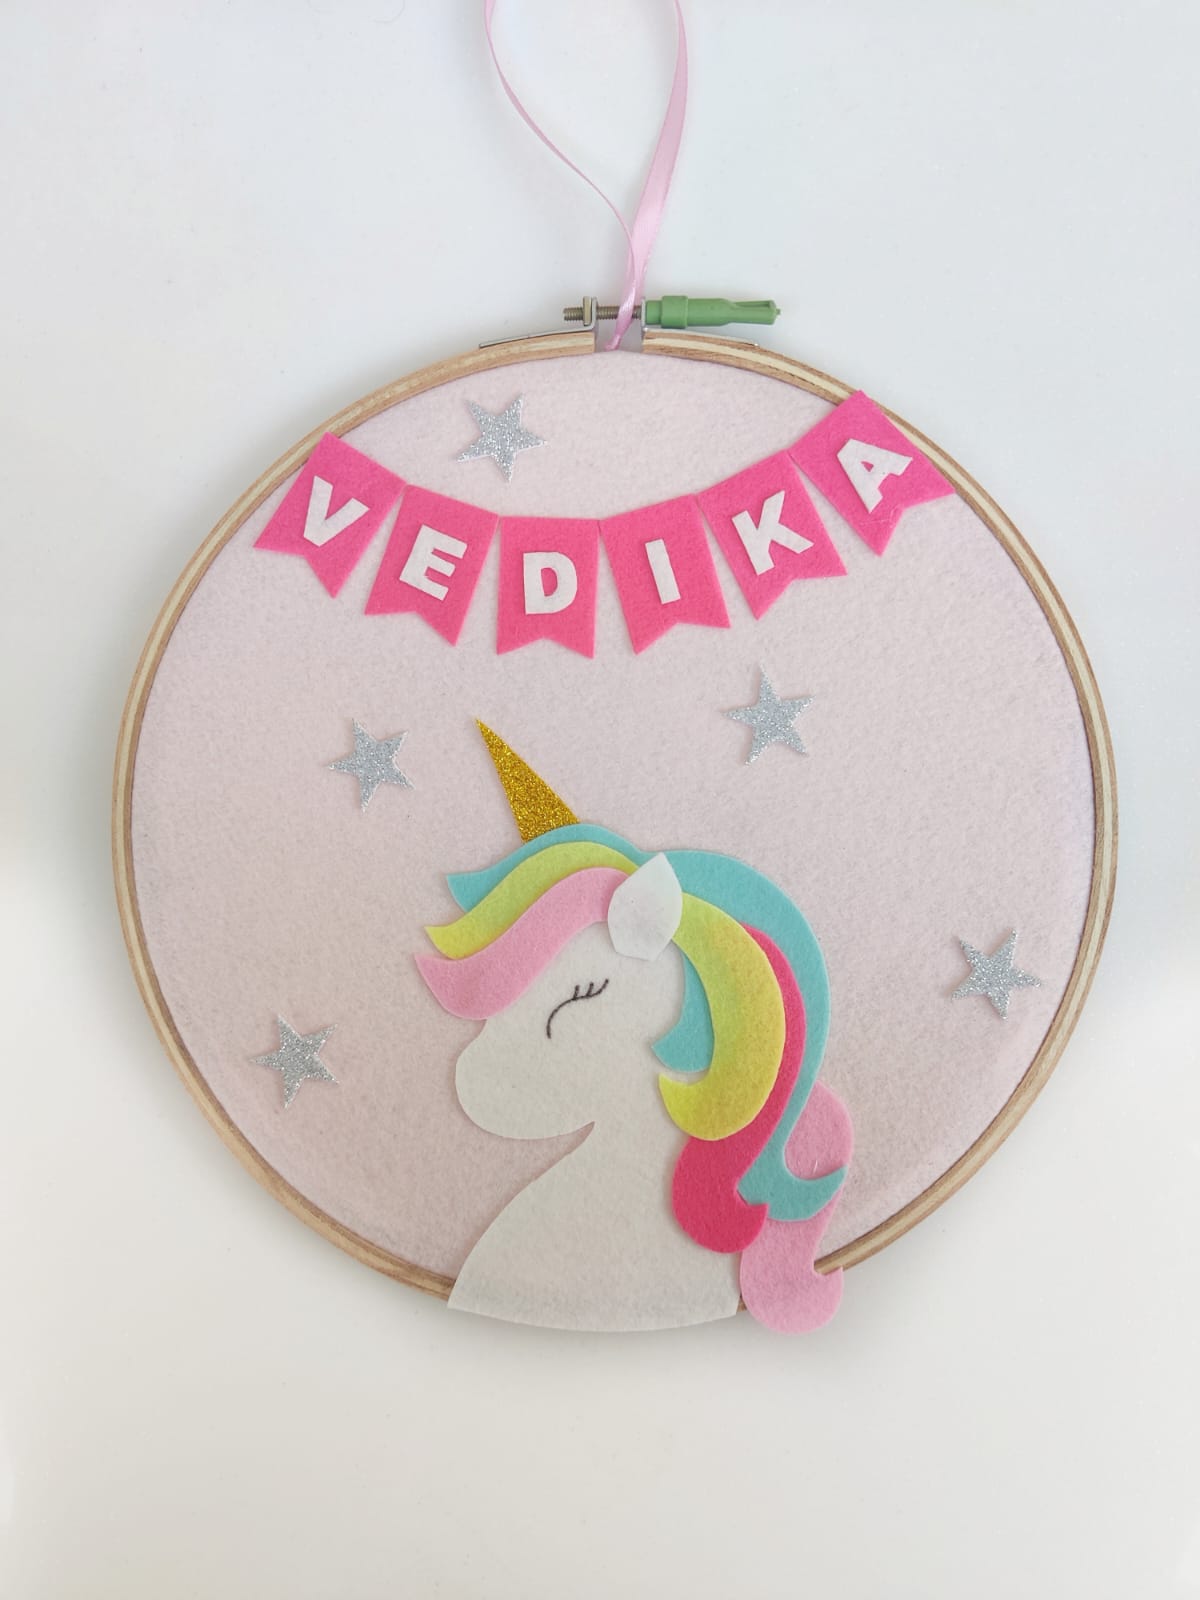 Hand-Crafted Embroidery Hoop Wall Hanging Art for Home Decor - Unicorn (PREPAID ORDER)